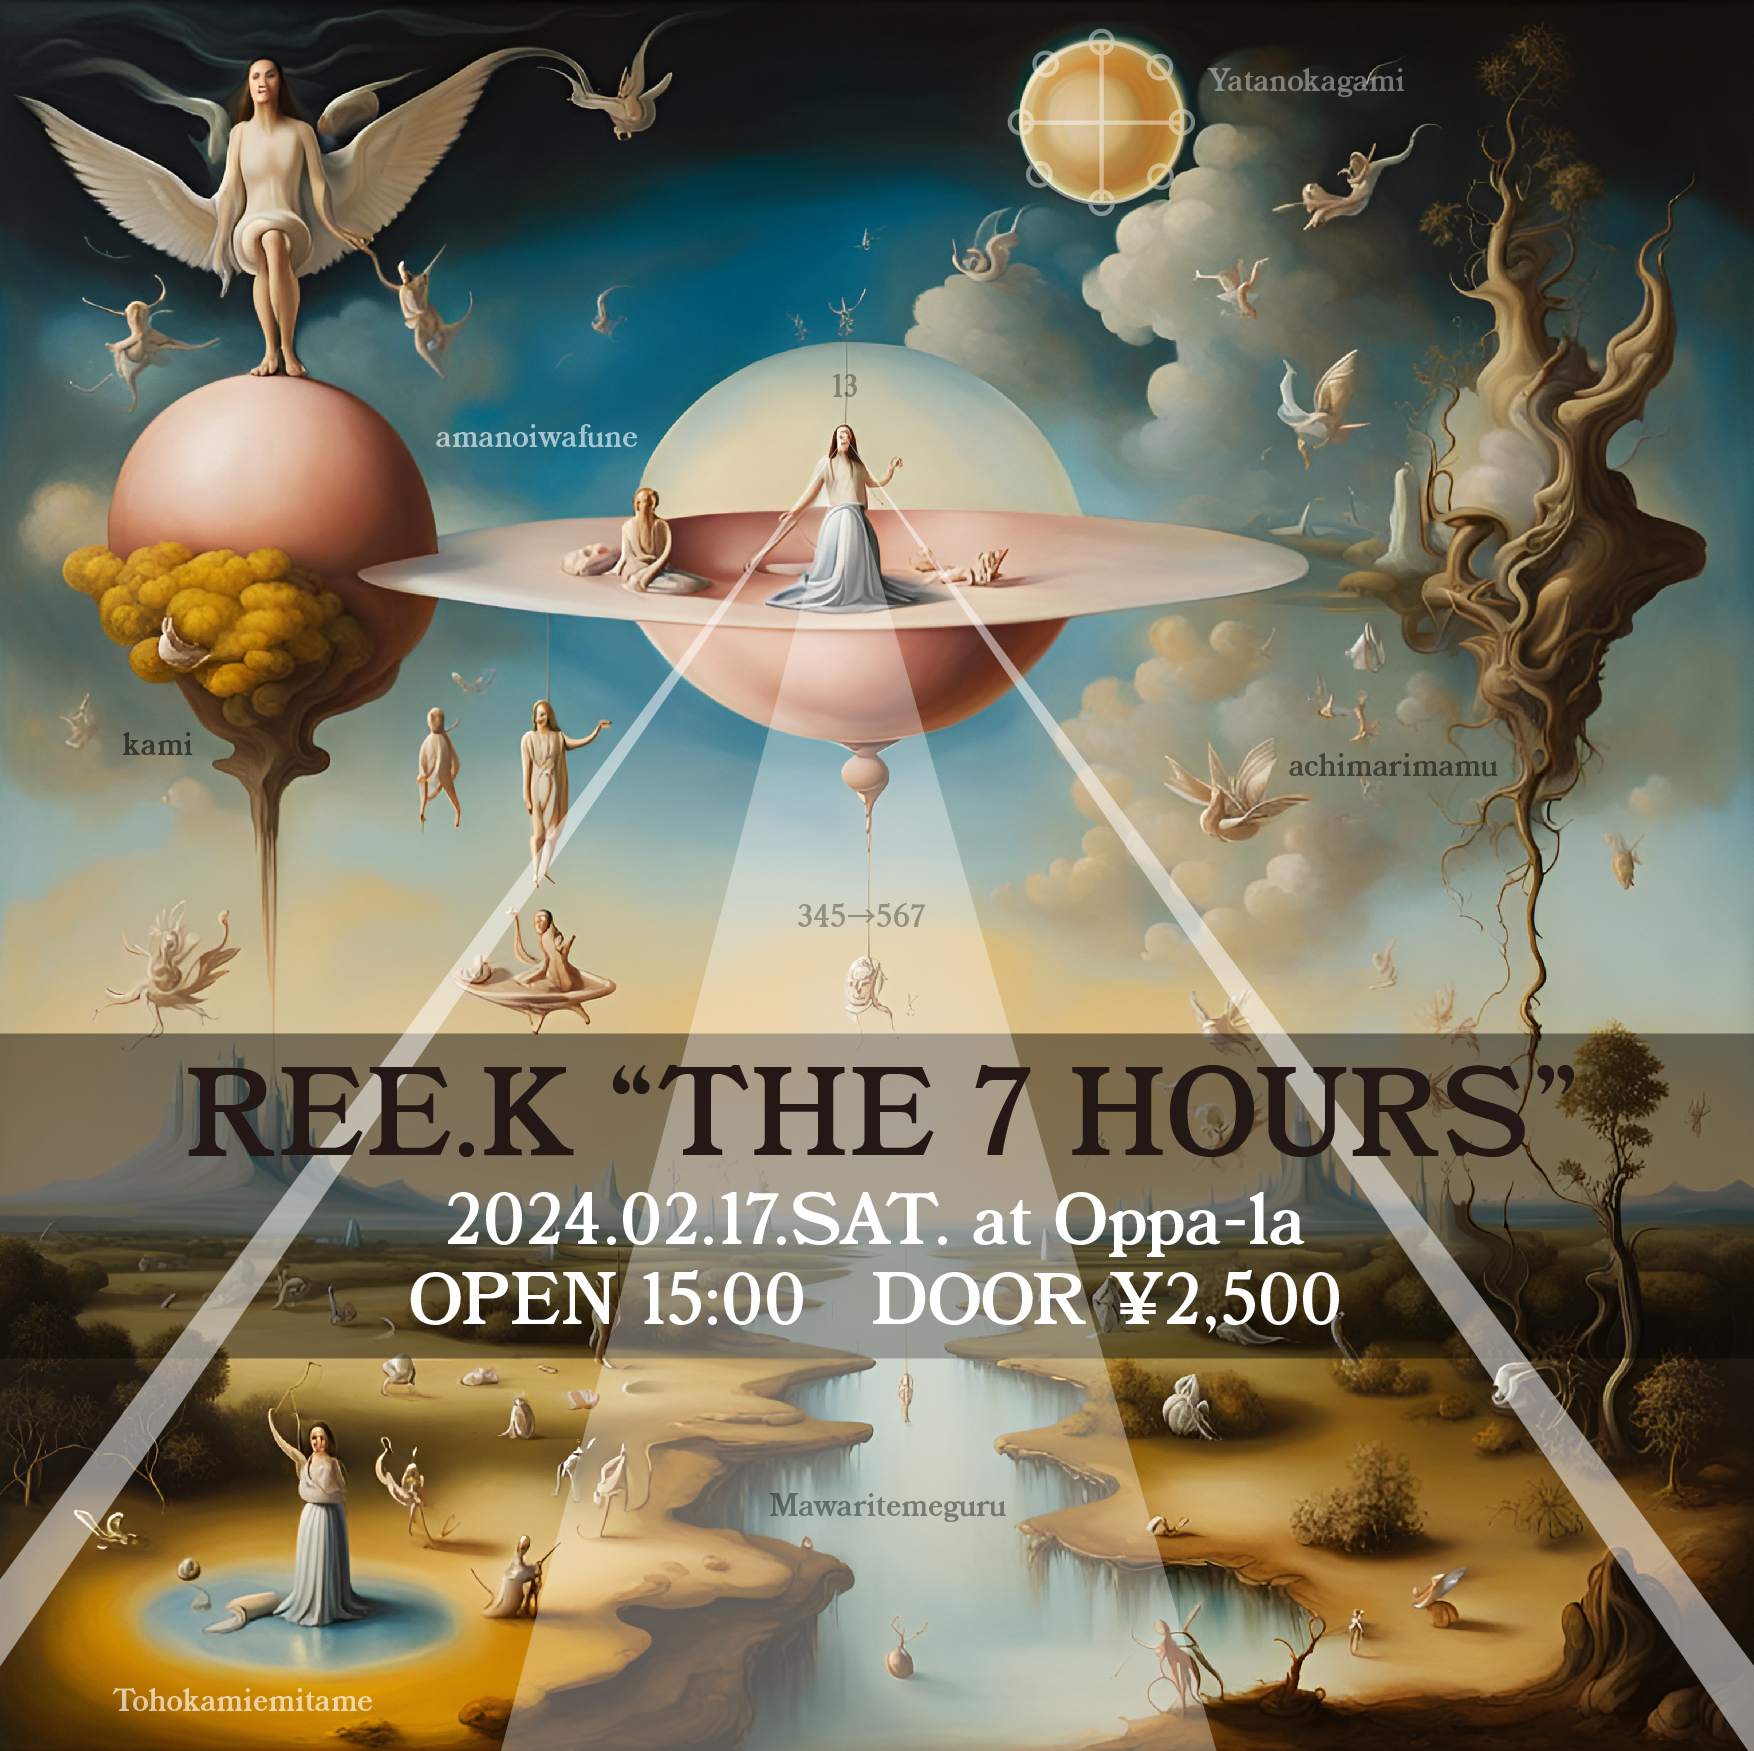 Ree.K 'THE 7 HOURS' - フライヤー表